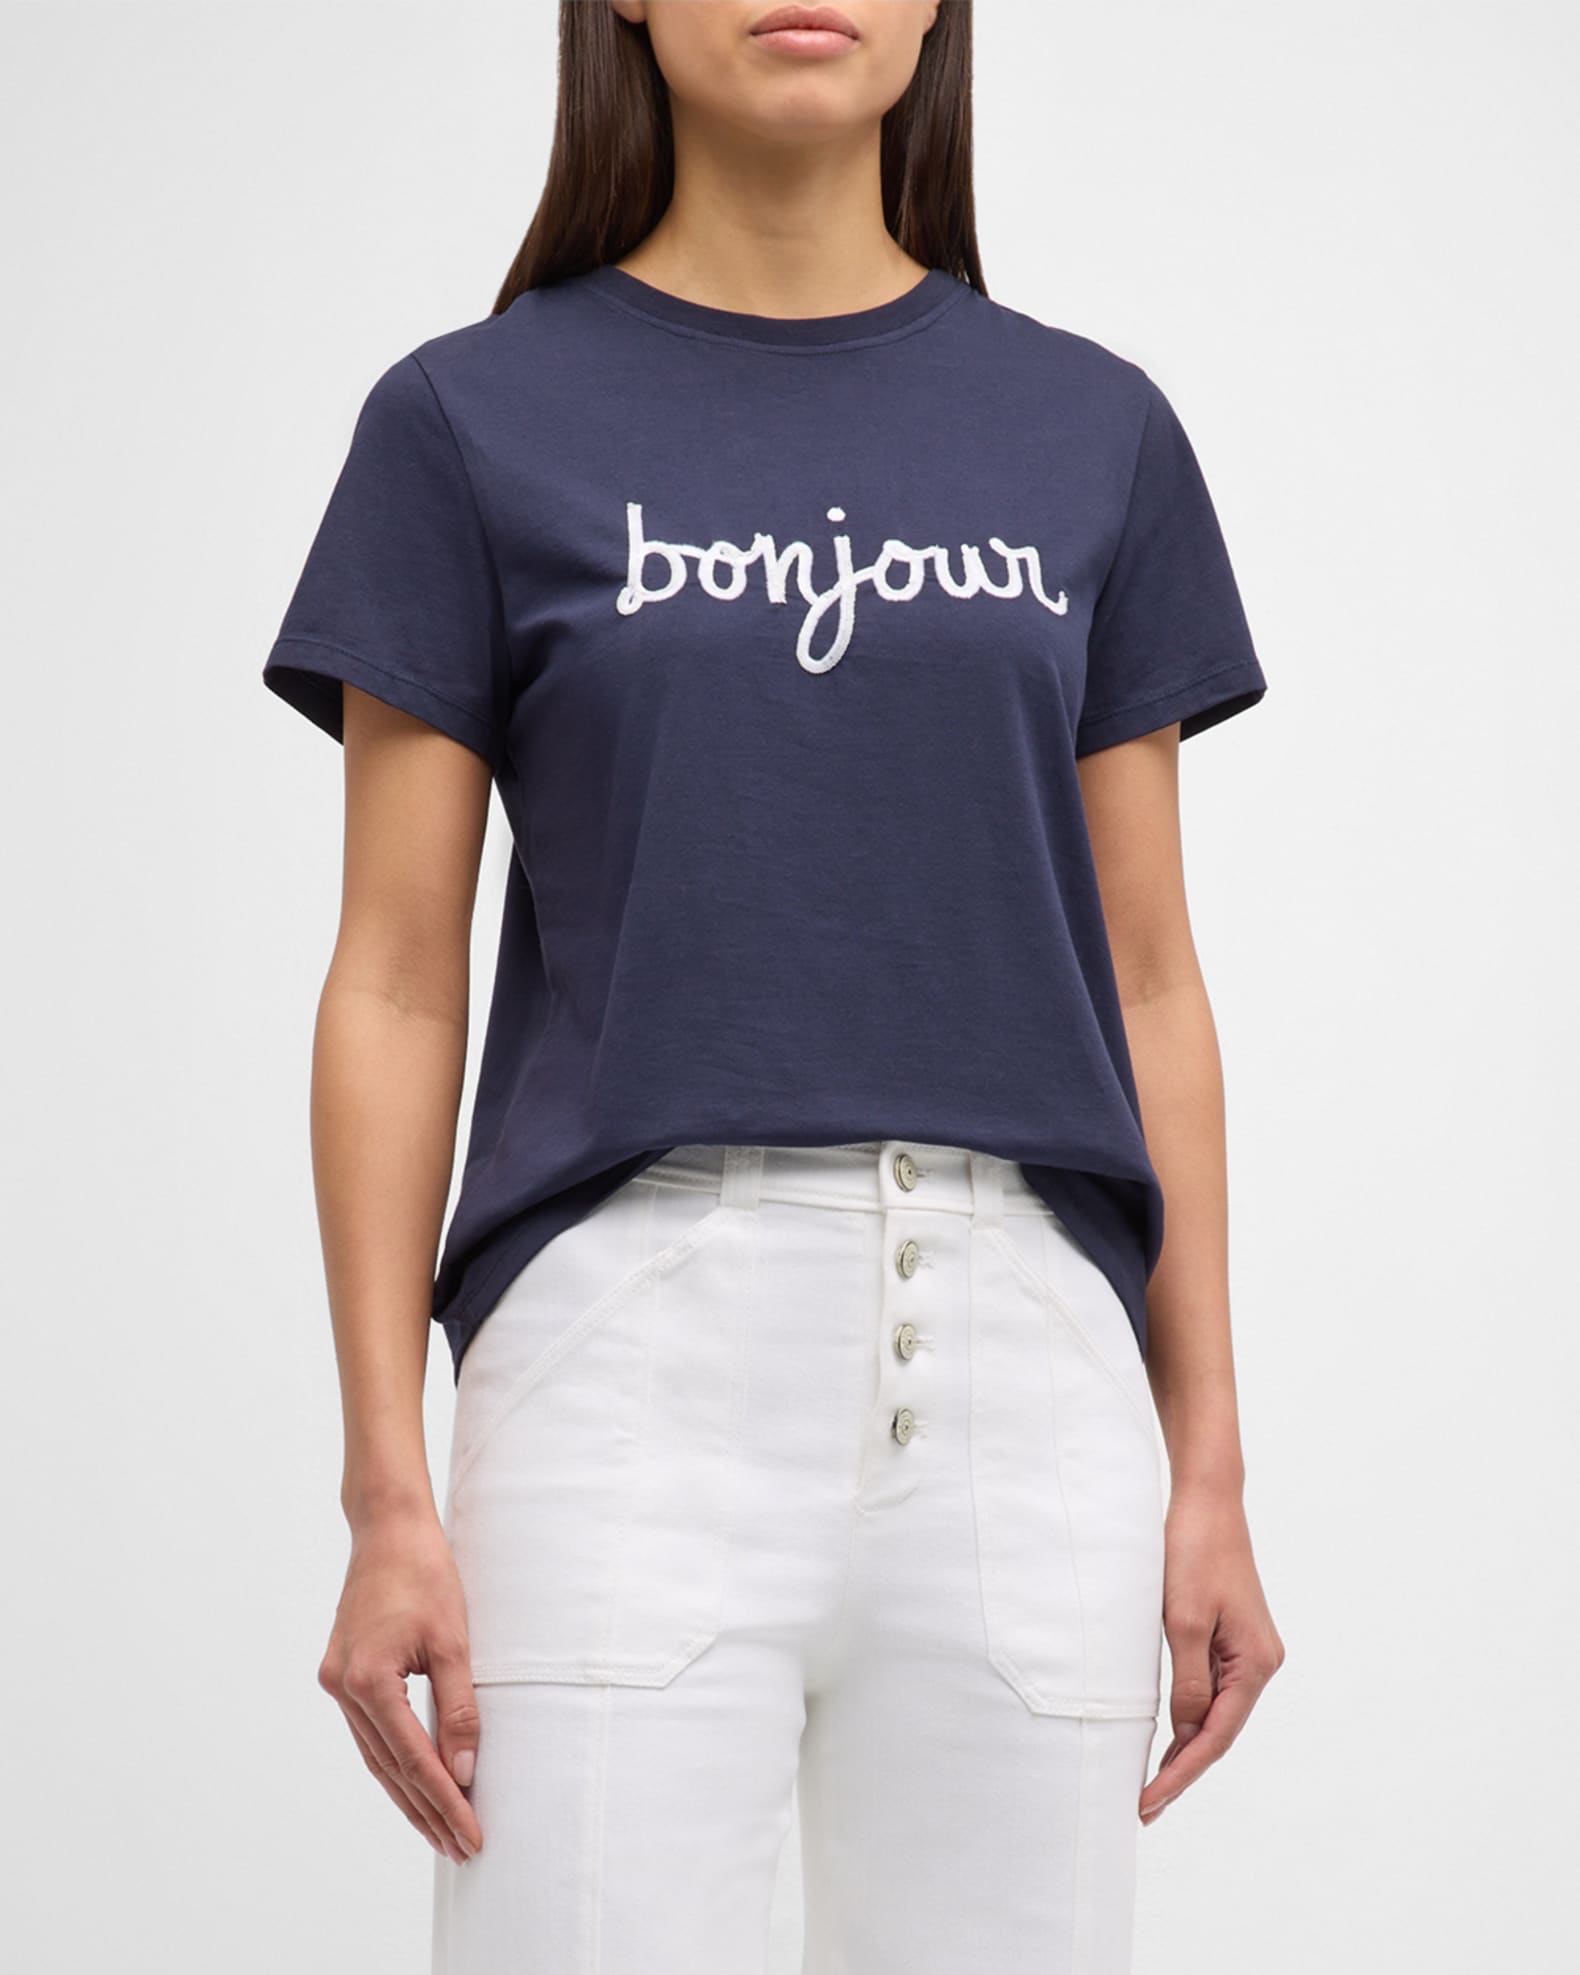 Sequined Bonjour Short-Sleeve Cotton Tee